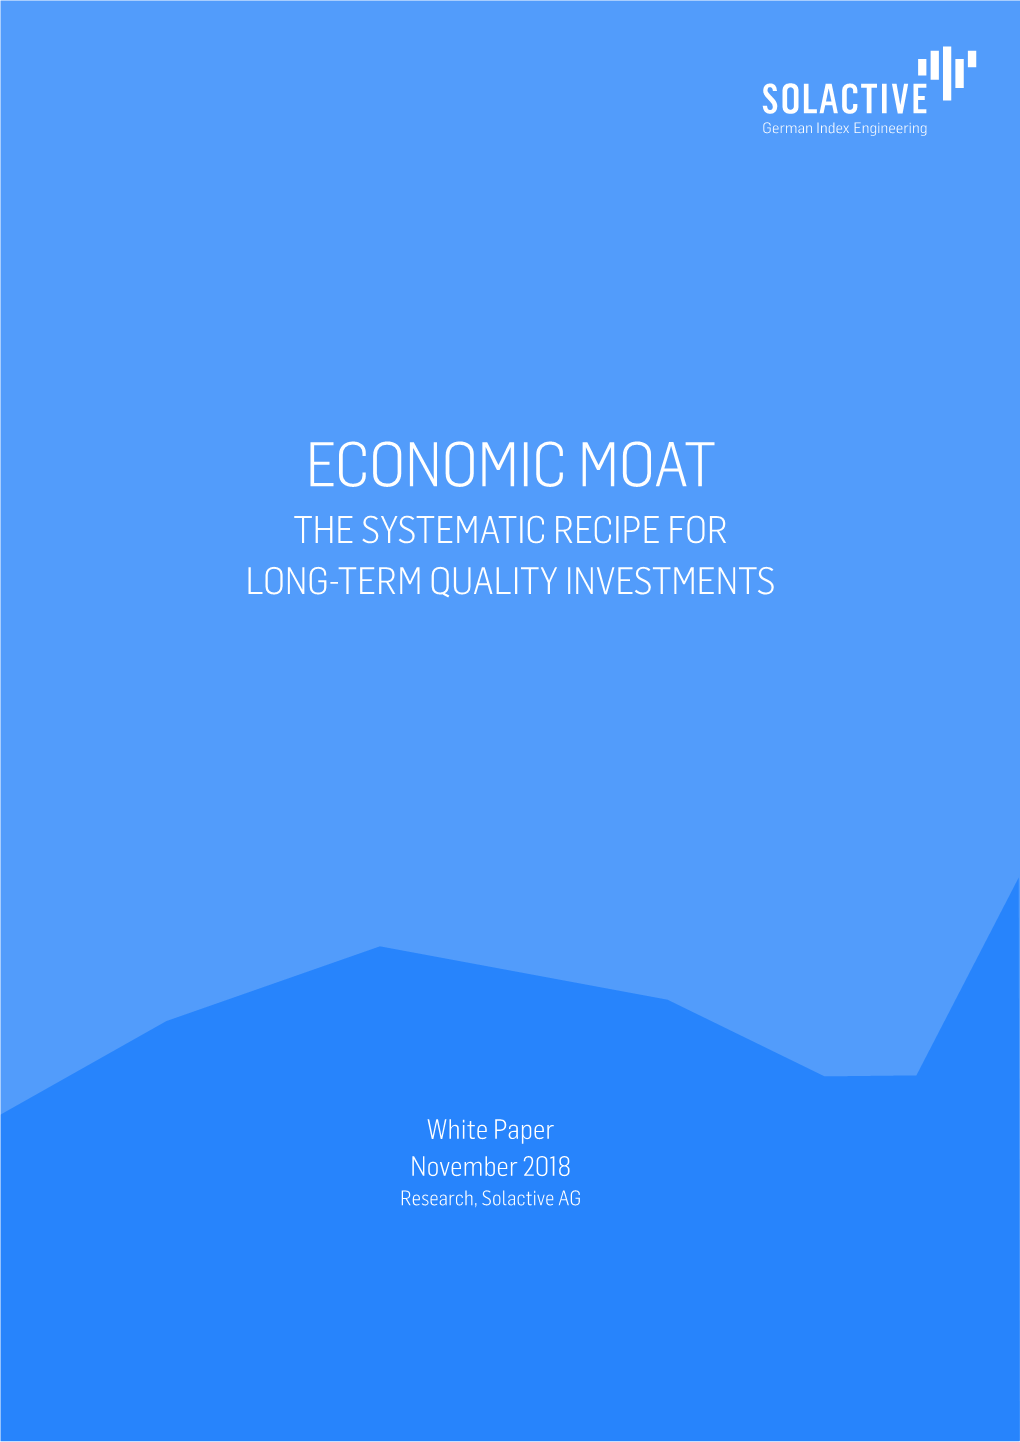 Solactive Systematic Economic Moat